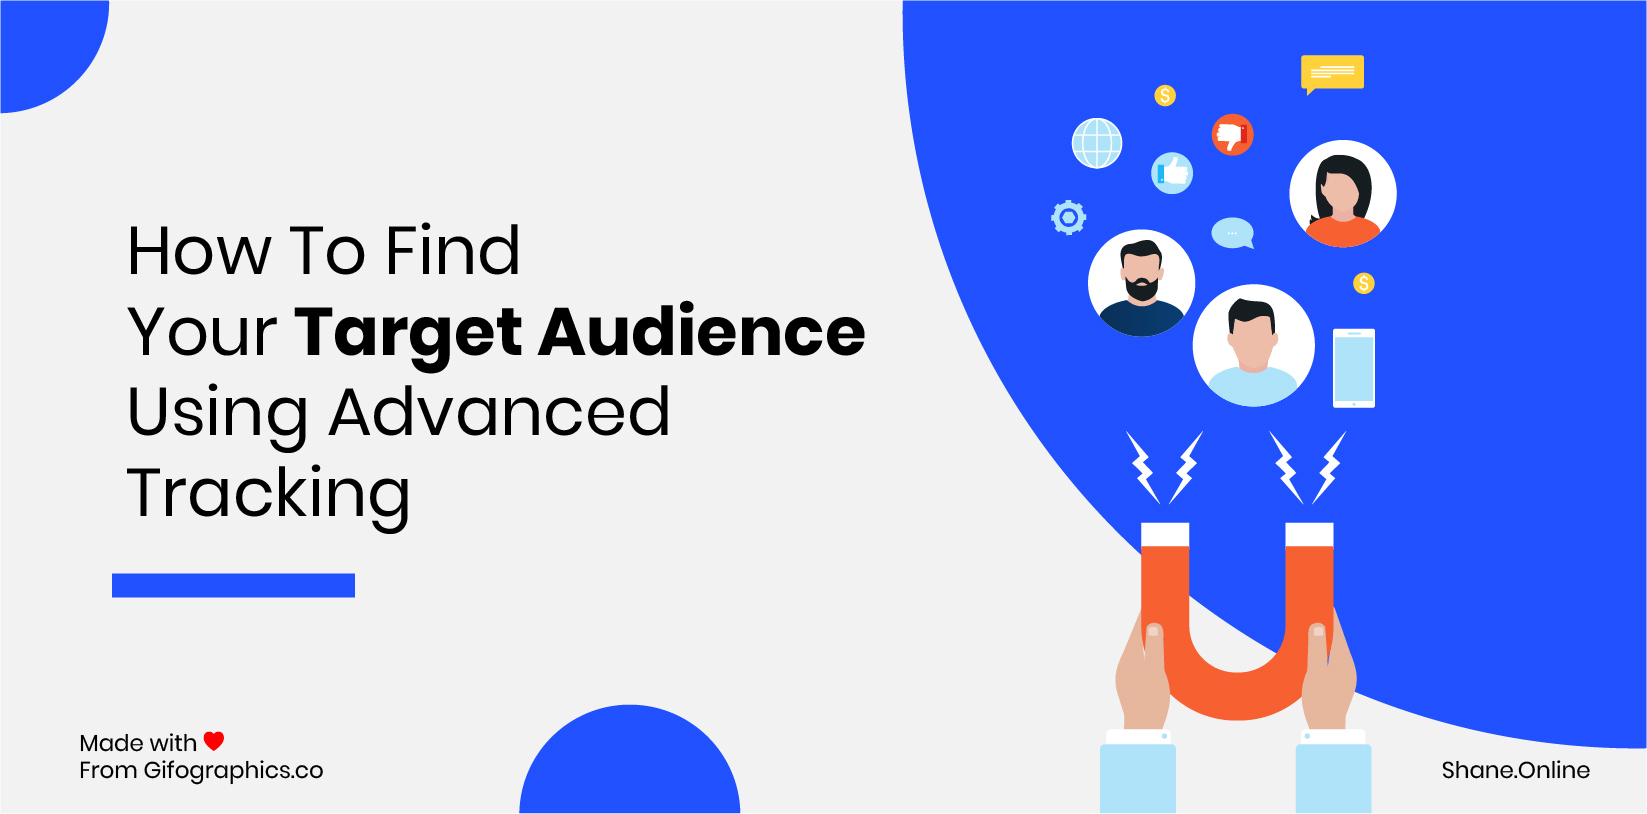 How To Find Your Target Audience Using Advanced Tracking